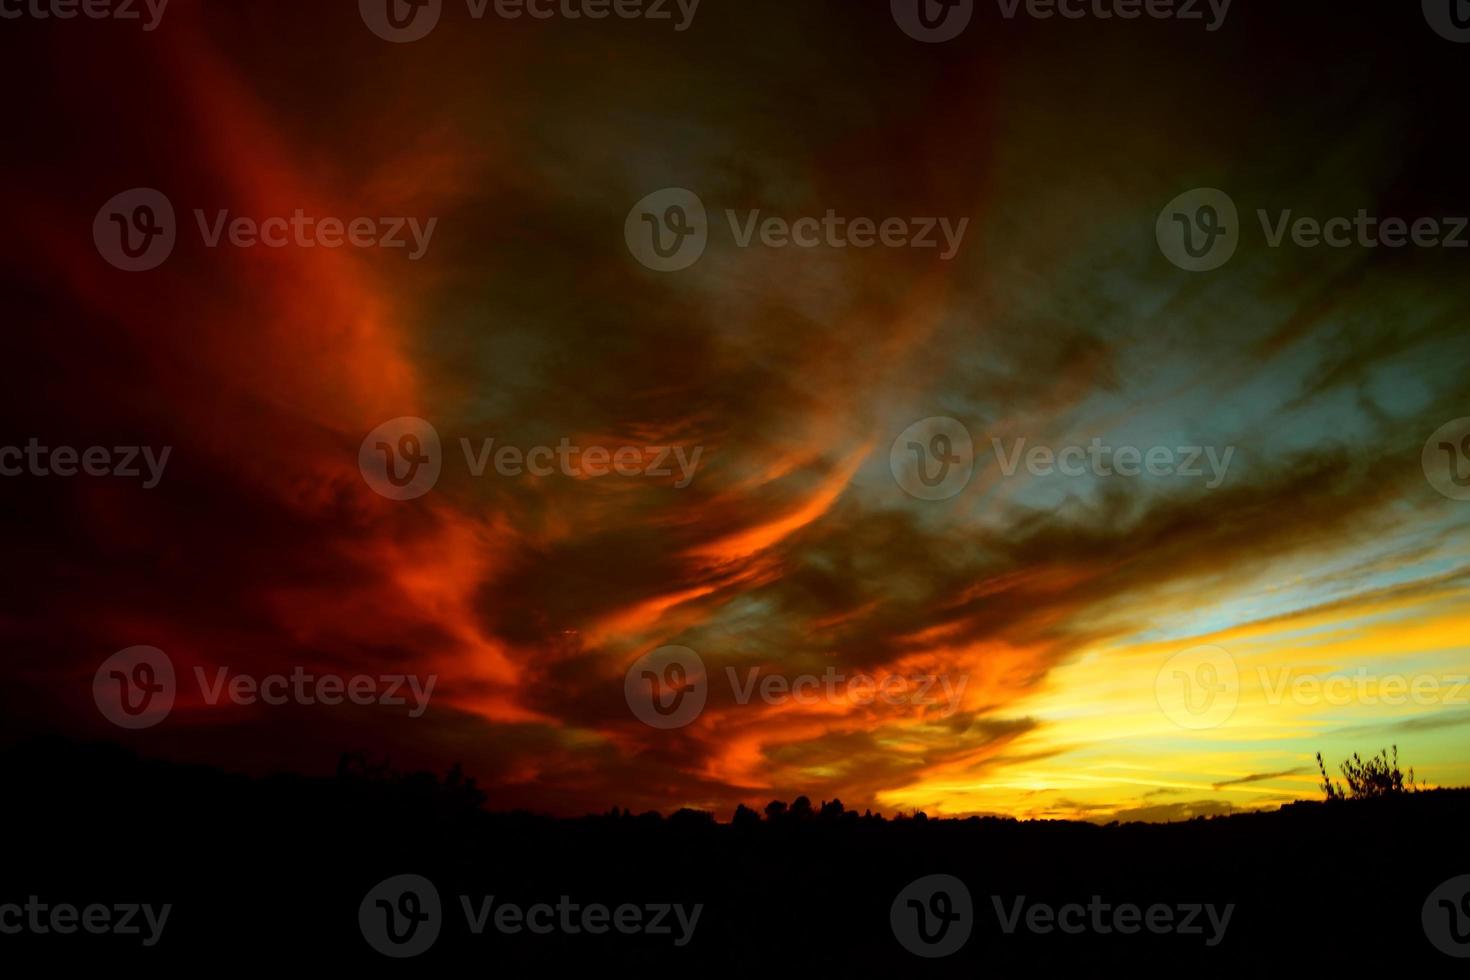 Apocalyptic sunset. Fiery red sunset. photo